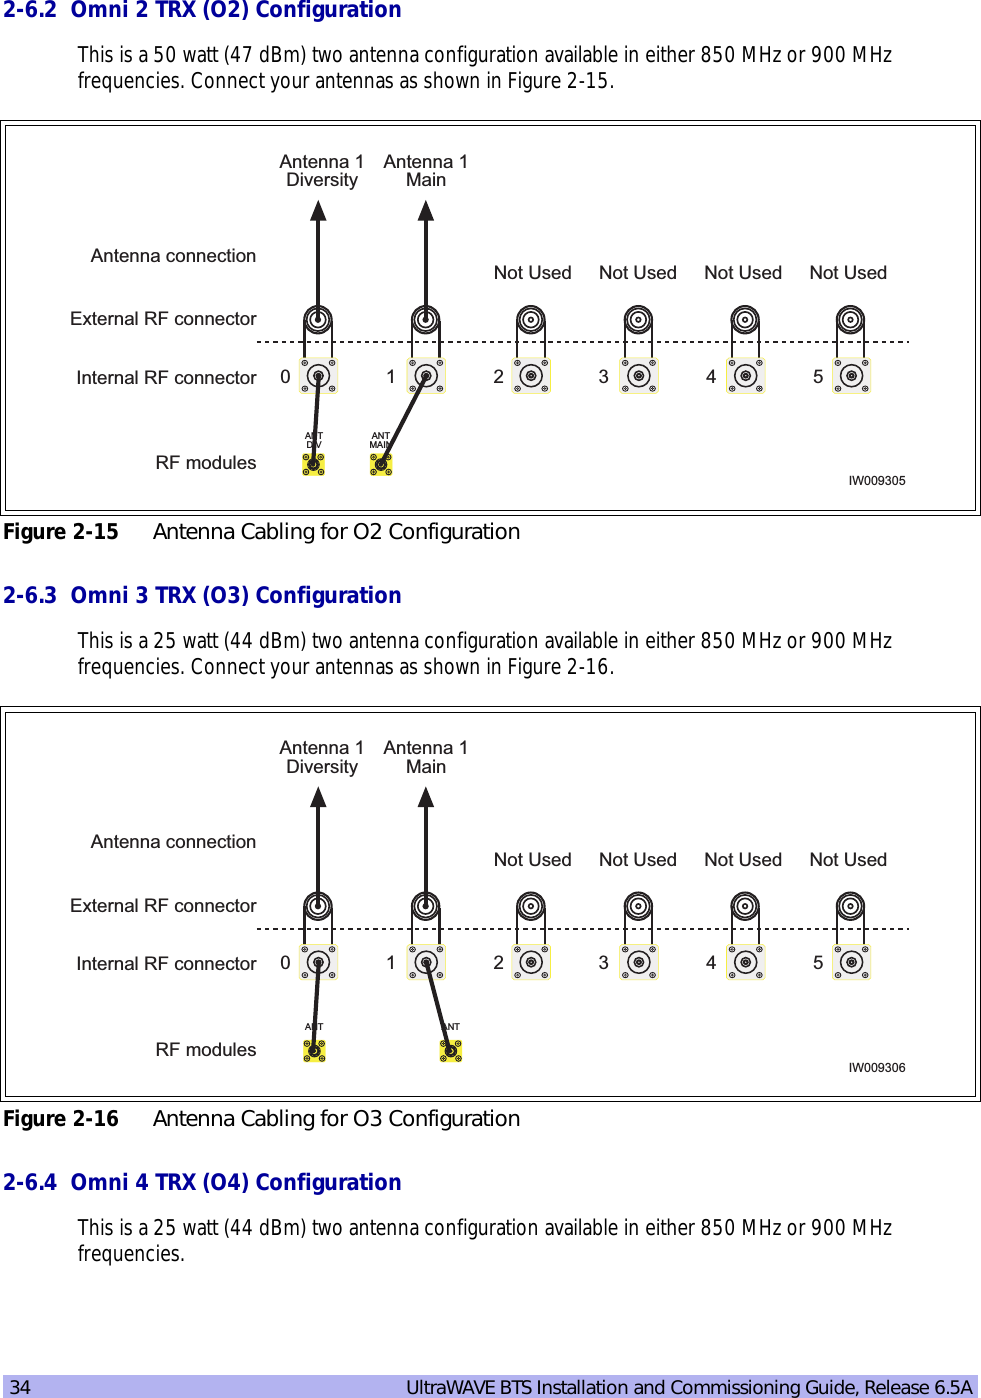 34   UltraWAVE BTS Installation and Commissioning Guide, Release 6.5A2-6.2  Omni 2 TRX (O2) ConfigurationThis is a 50 watt (47 dBm) two antenna configuration available in either 850 MHz or 900 MHz frequencies. Connect your antennas as shown in Figure 2-15.2-6.3  Omni 3 TRX (O3) ConfigurationThis is a 25 watt (44 dBm) two antenna configuration available in either 850 MHz or 900 MHz frequencies. Connect your antennas as shown in Figure 2-16.2-6.4  Omni 4 TRX (O4) ConfigurationThis is a 25 watt (44 dBm) two antenna configuration available in either 850 MHz or 900 MHz frequencies.Figure 2-15 Antenna Cabling for O2 ConfigurationFigure 2-16 Antenna Cabling for O3 ConfigurationRF modulesIW009305ANTDIVANTMAINInternal RF connectorExternal RF connectorAntenna 1DiversityAntenna connection1 2 3 4 50Not UsedNot Used Not Used Not UsedAntenna 1MainANTRF modulesIW009306Internal RF connectorExternal RF connectorAntenna 1DiversityAntenna connection1 2 3 4 50Not UsedNot Used Not Used Not UsedAntenna 1MainANT